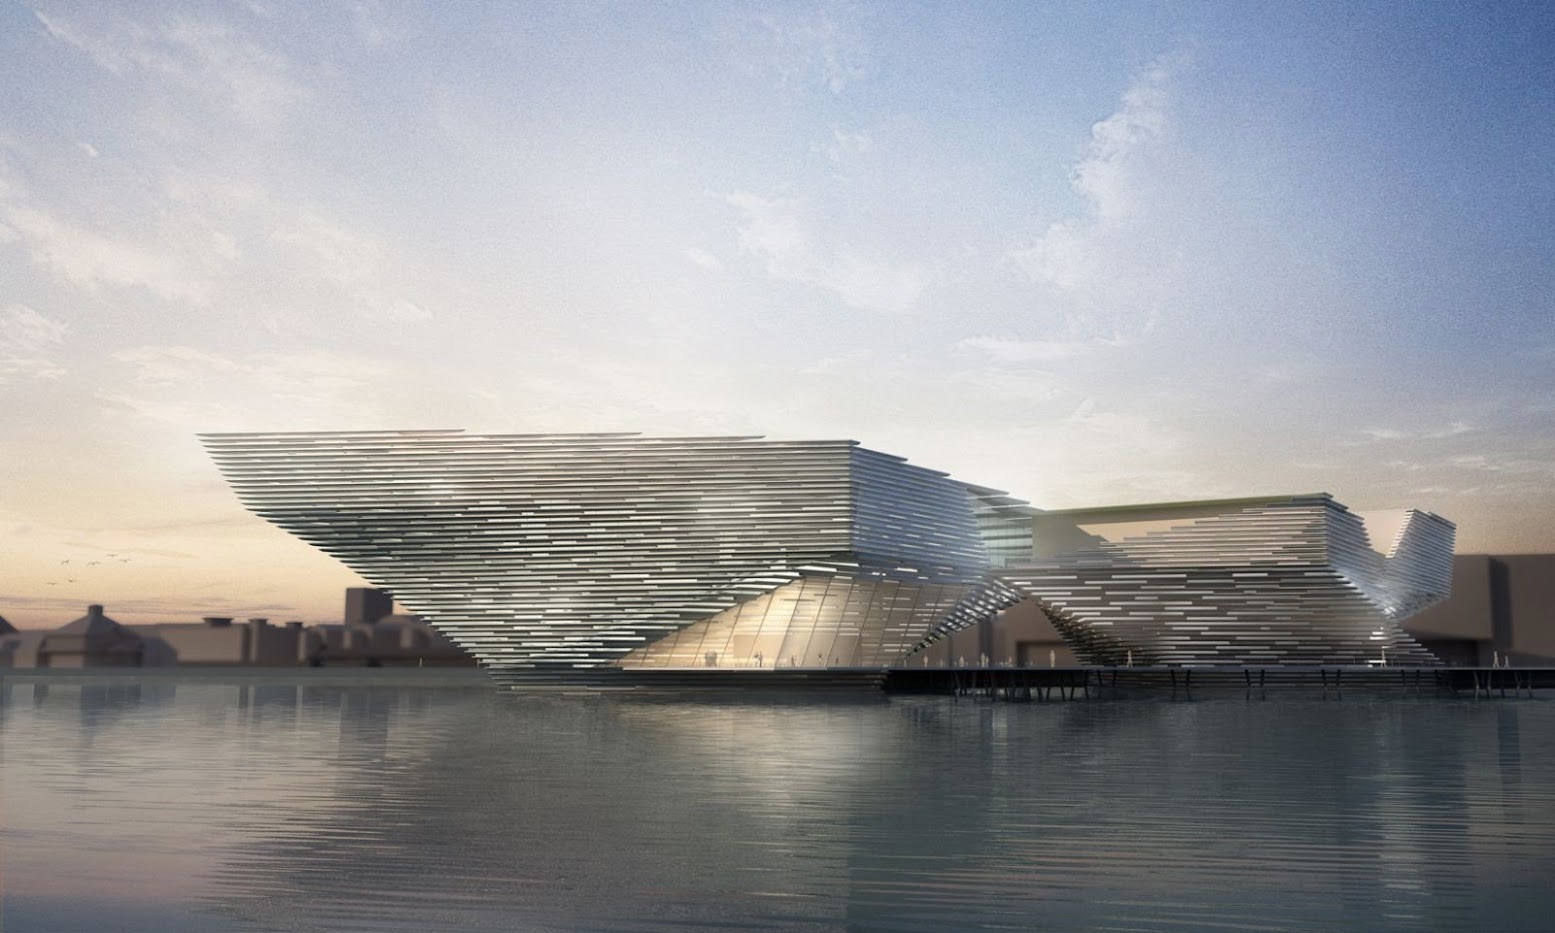 Dundee, Dundee City, Regno Unito: [V&A MUSEUM BY KENGO KUMA READ TO START]